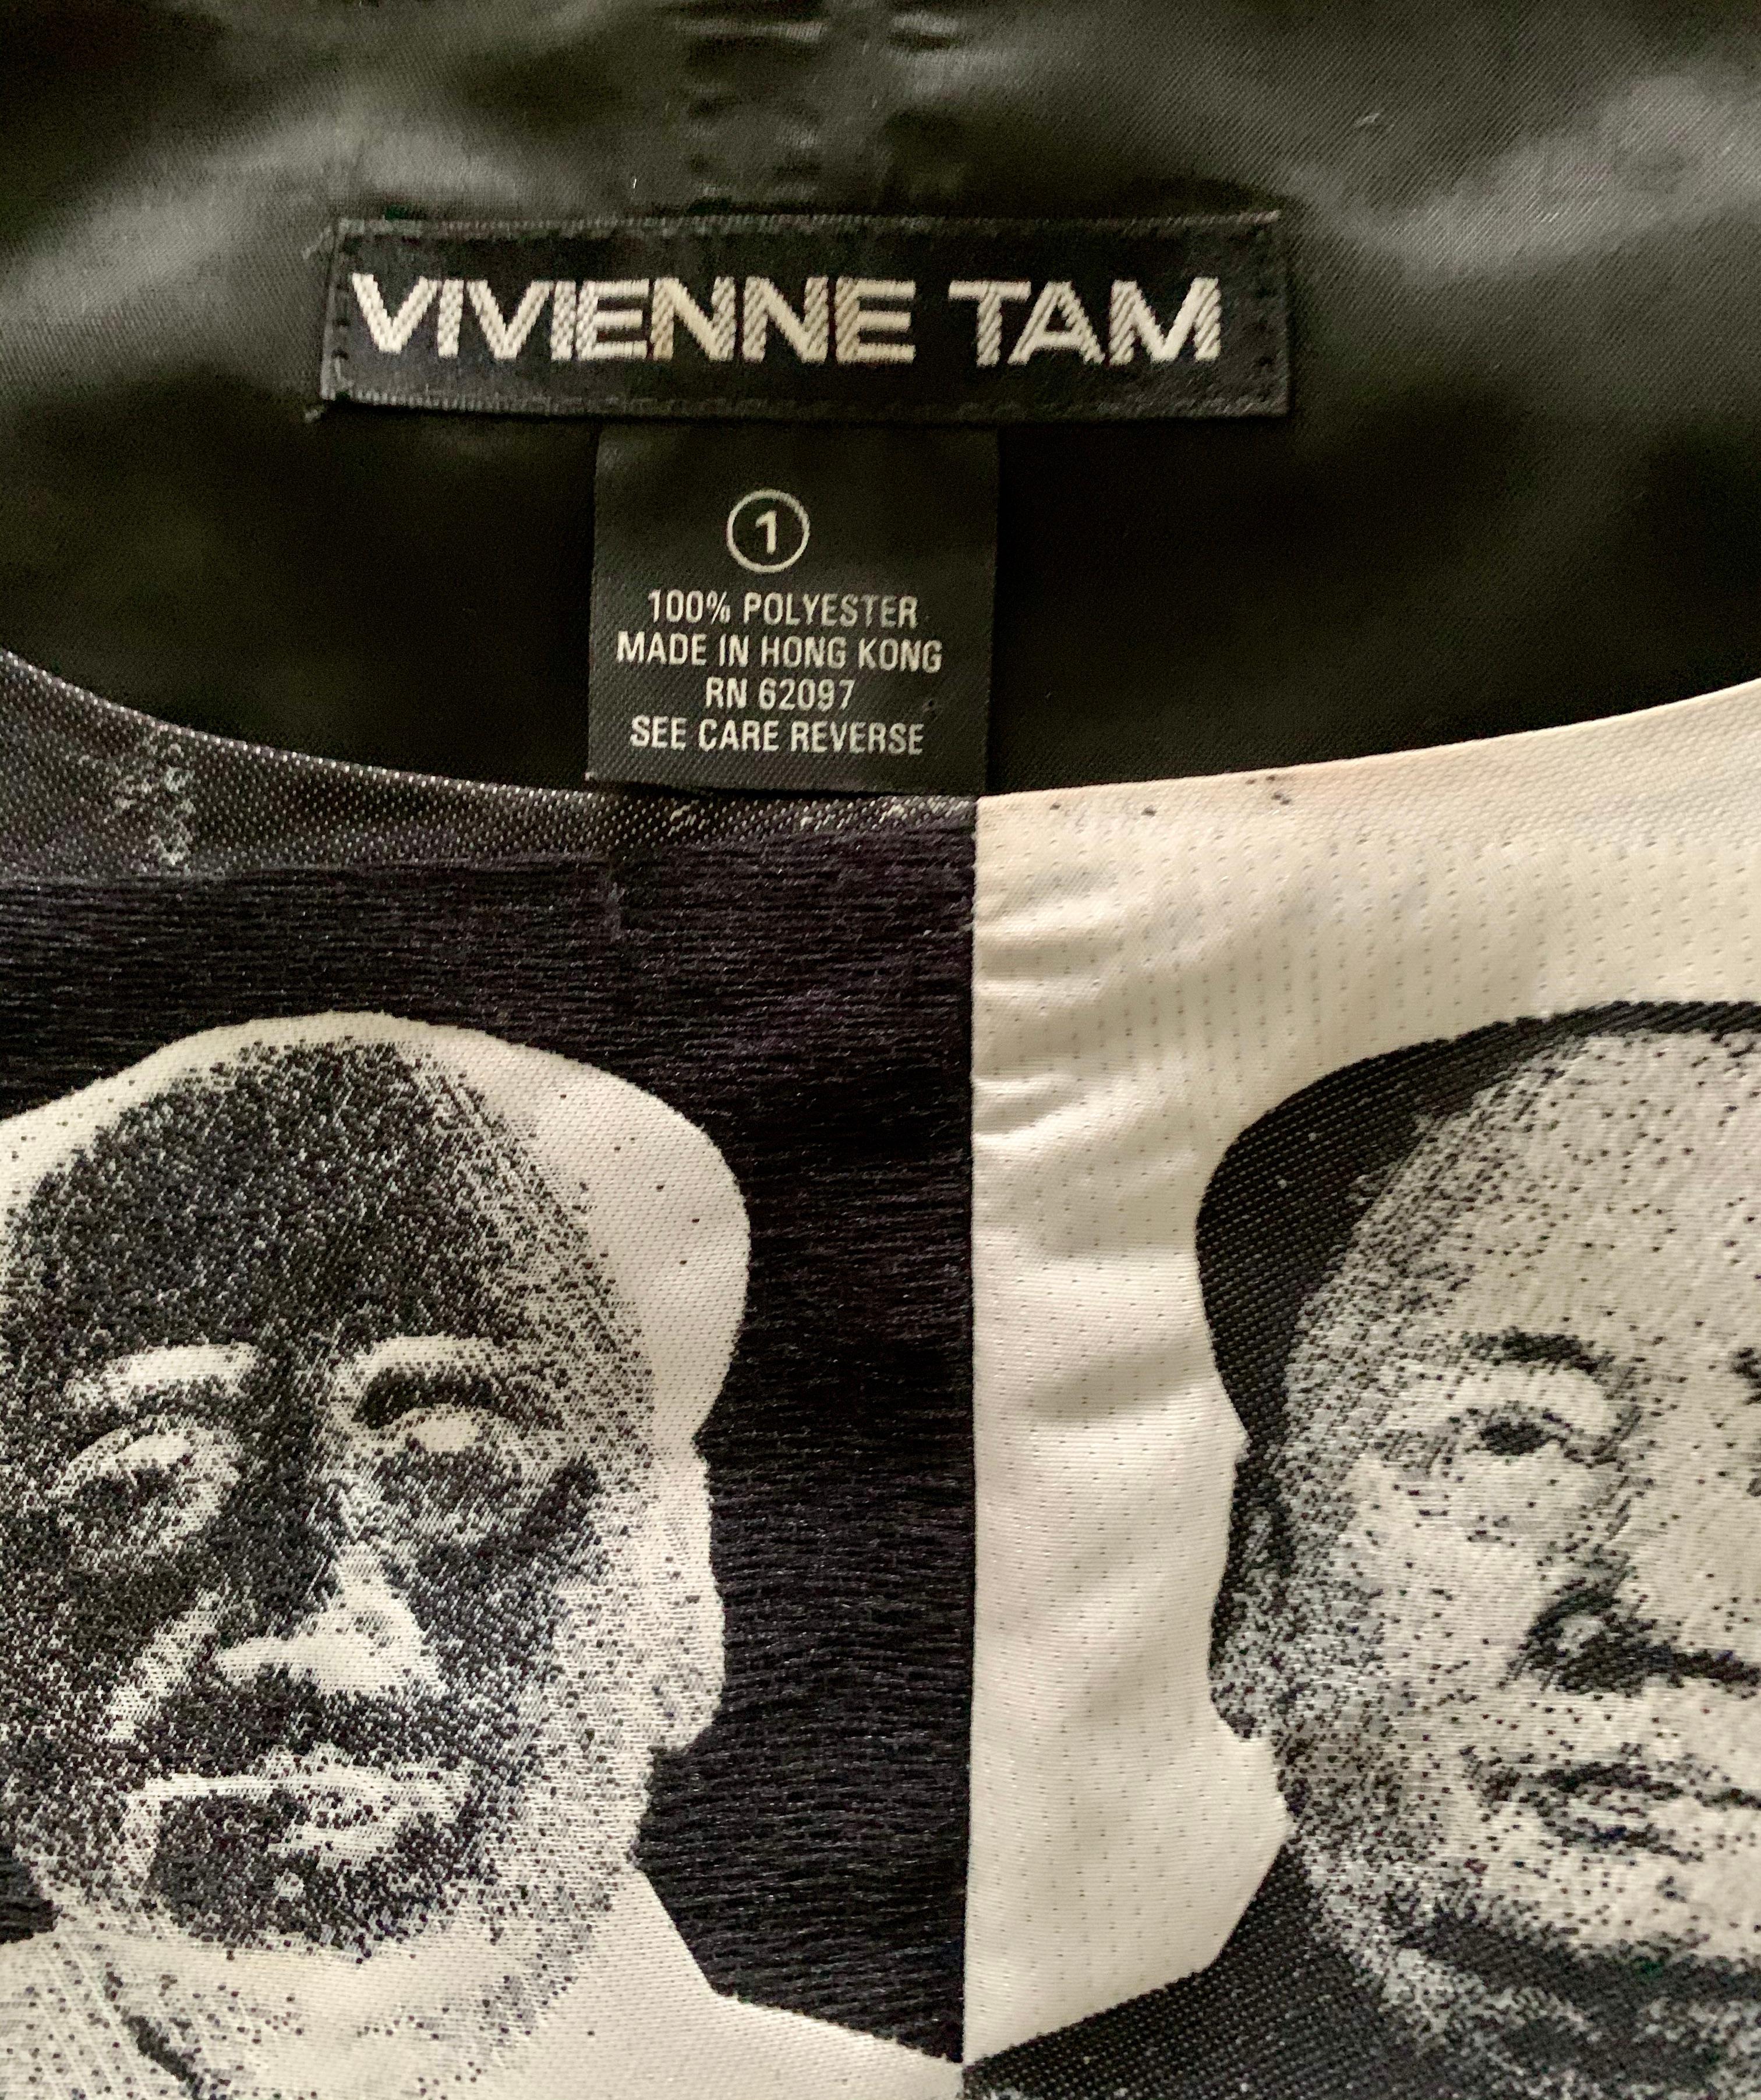 An iconic and highly collectible 1990s Chairman Mao dress, designed by Vivienne Tam. The V & A museum in London acquired several pieces from Tam's 'Mao Collection' of spring, 1995.

In a black and white Warhol inspired print showing the face of Mao